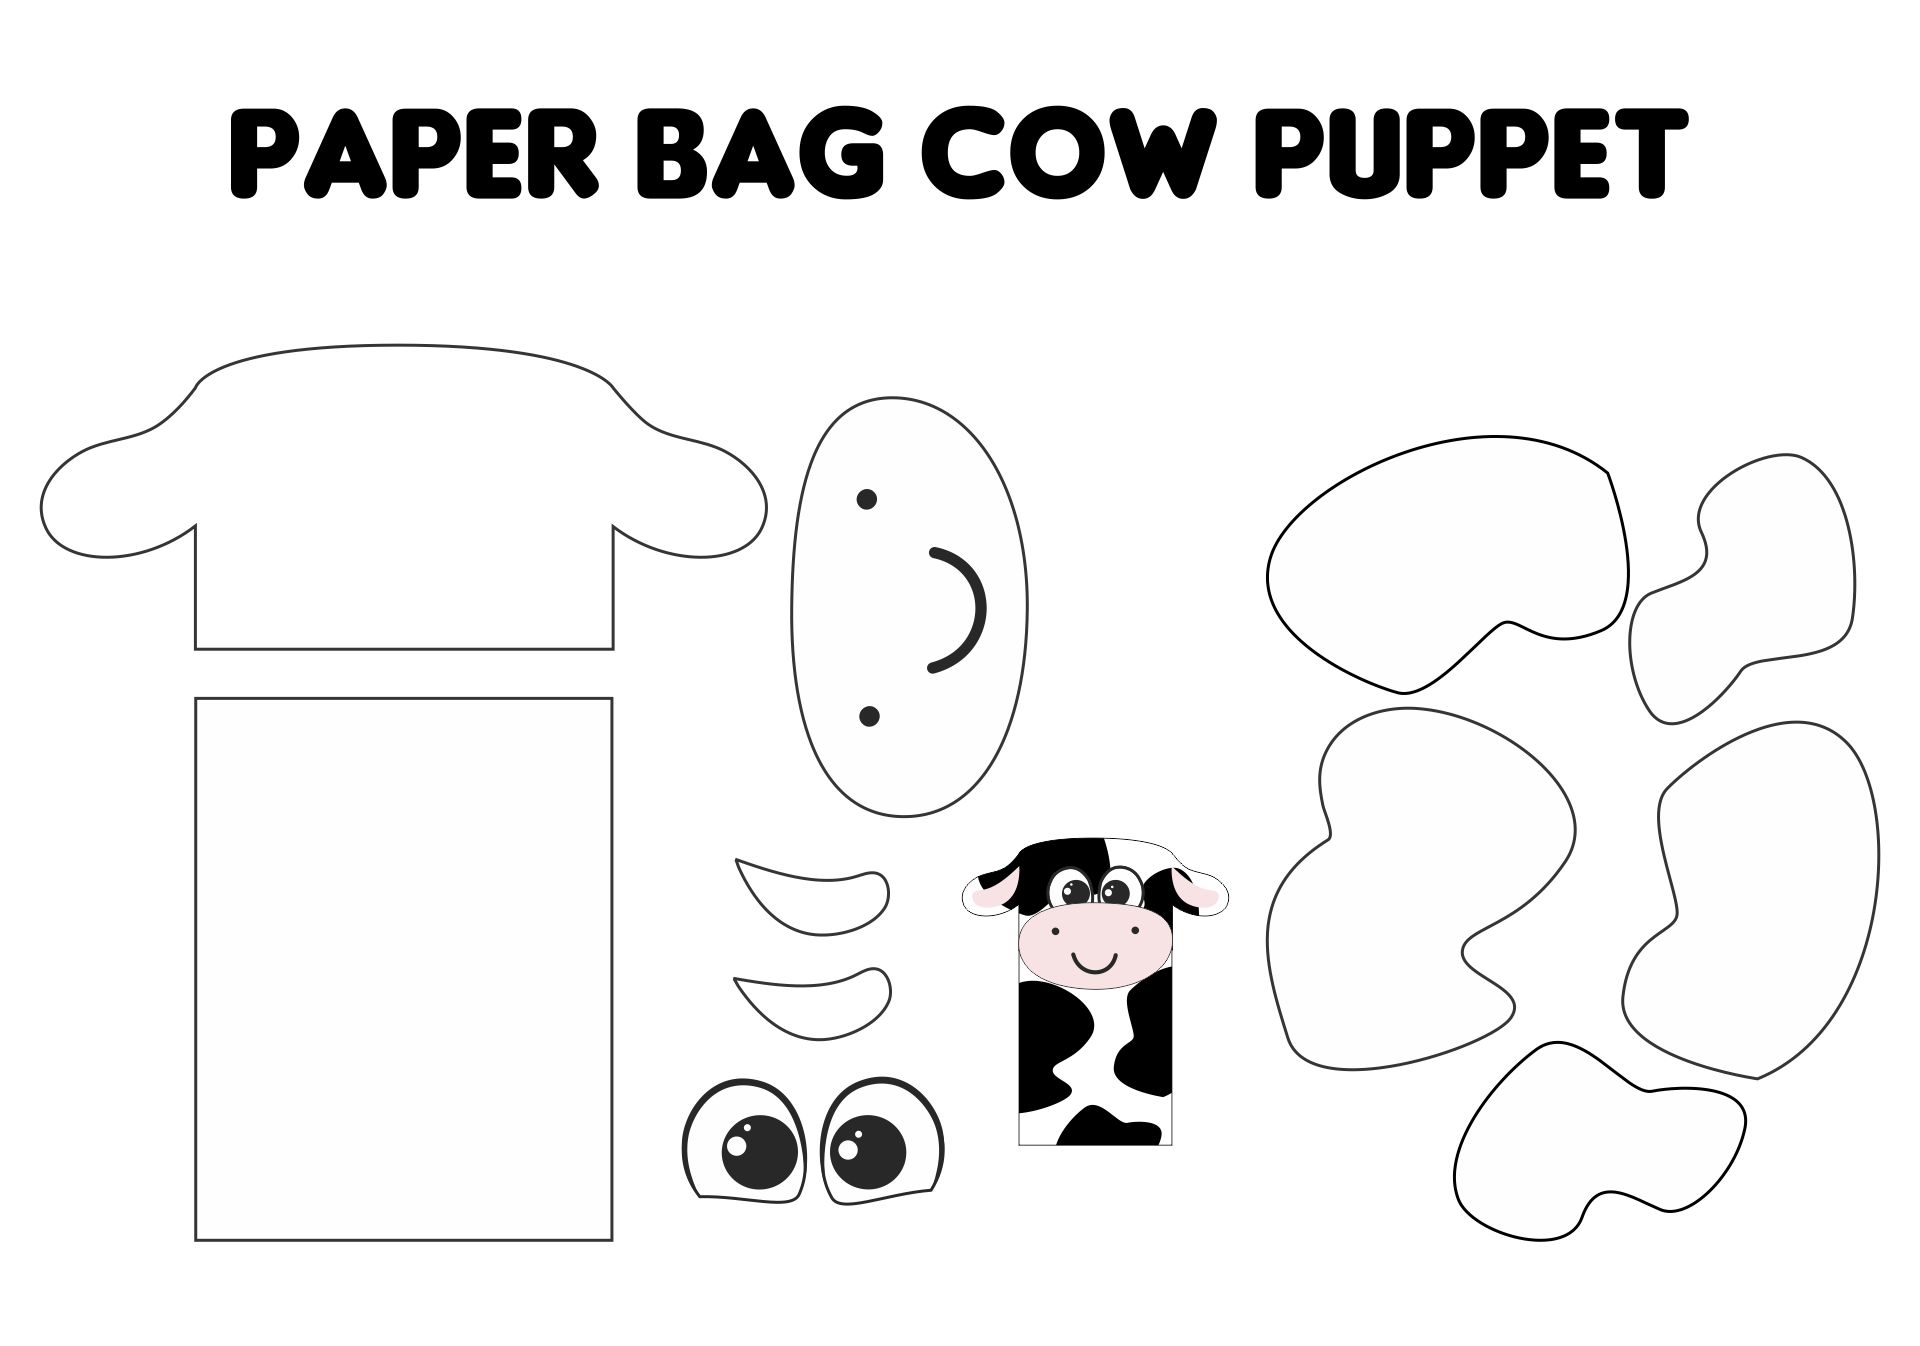 Cow Paper Bag Puppet for Theres A Cow in the Cabbage Patch